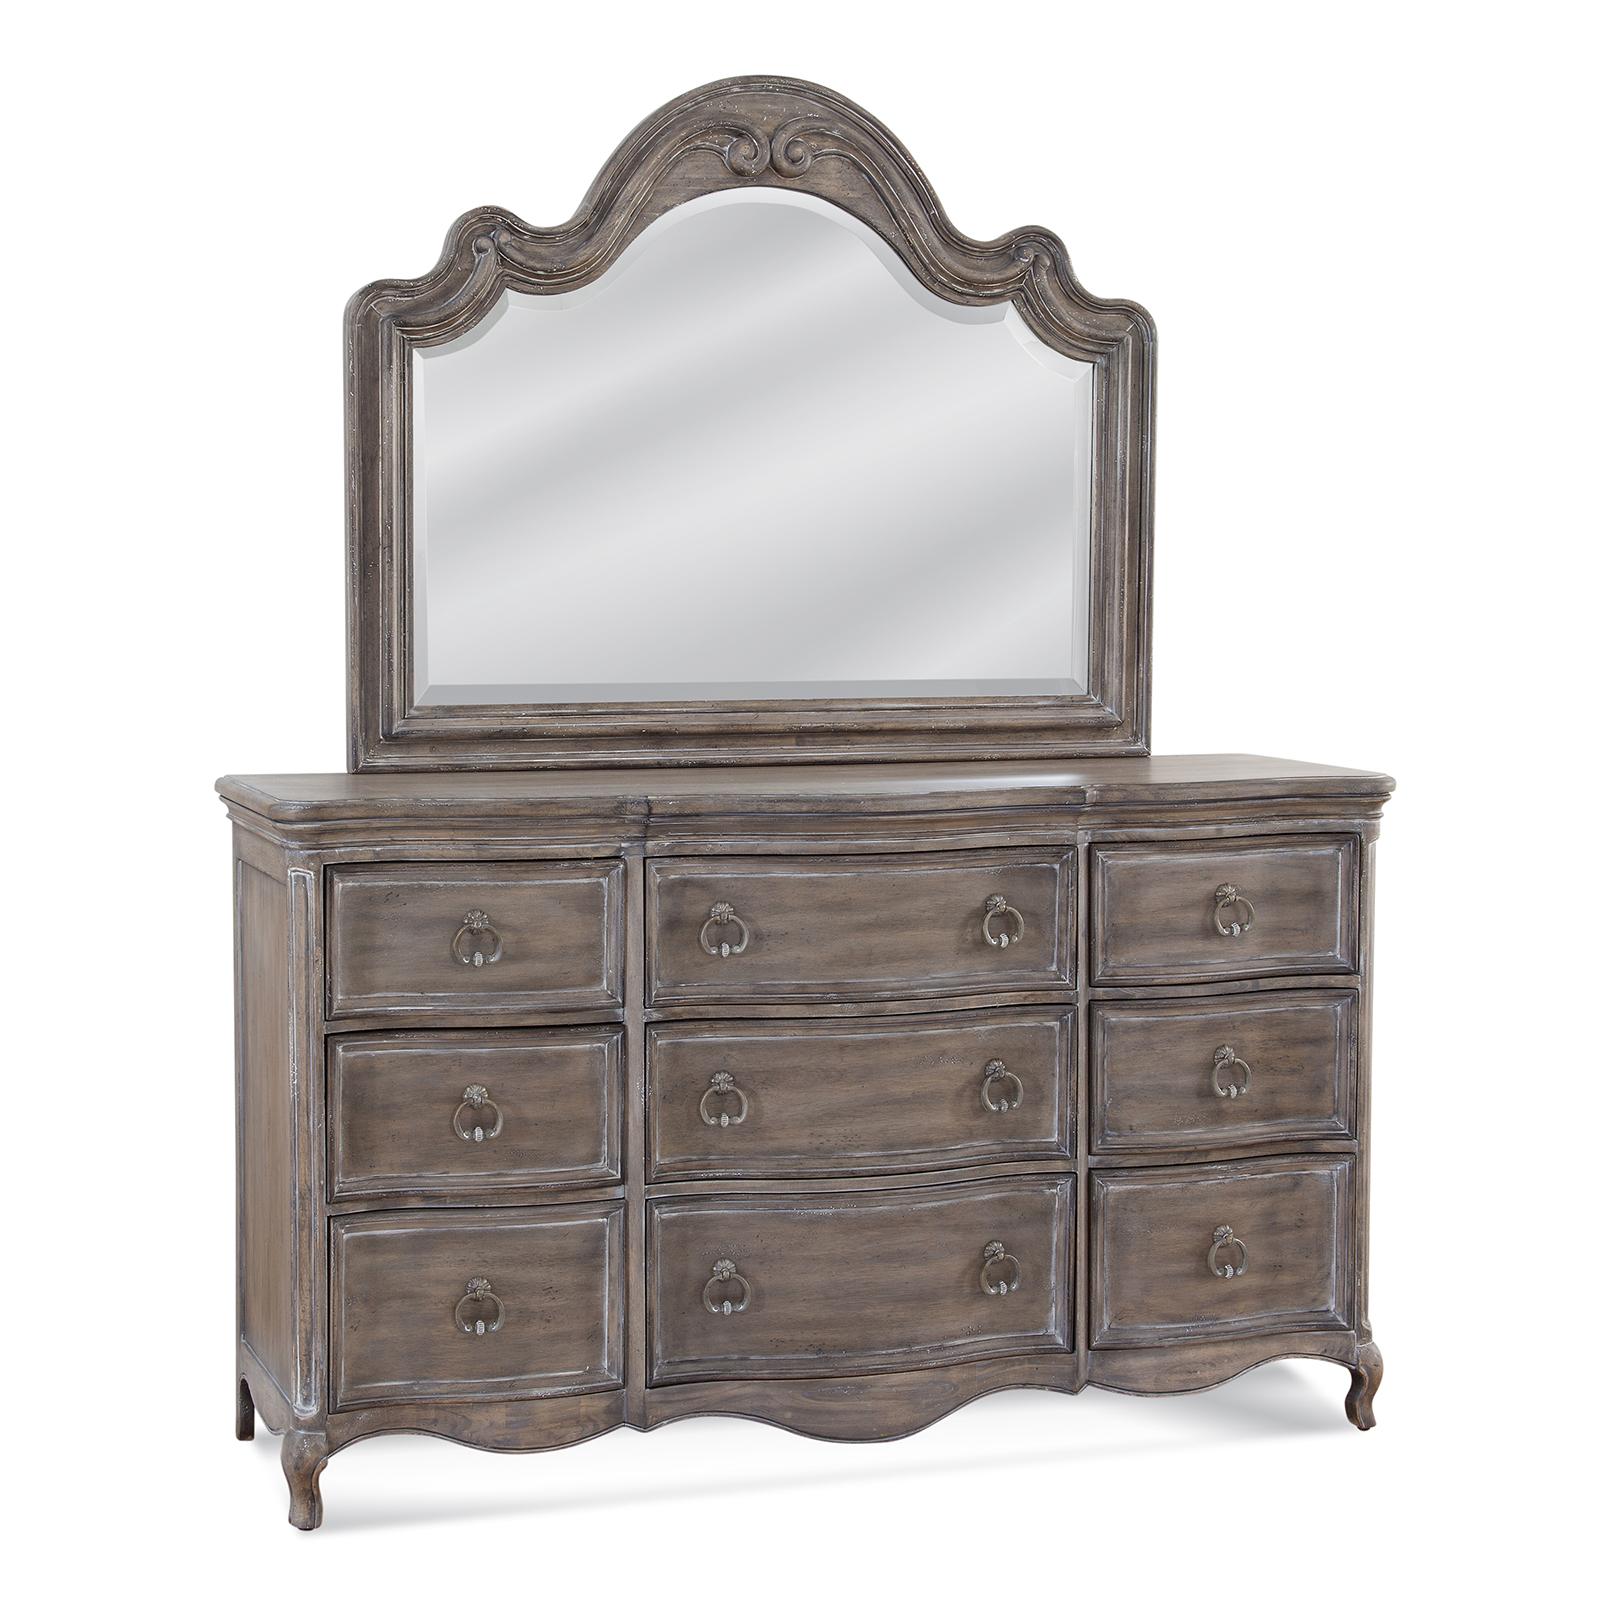 Classic, Traditional Dresser With Mirror 1575-TDLM 1575-TDLM in Antique, Gray 